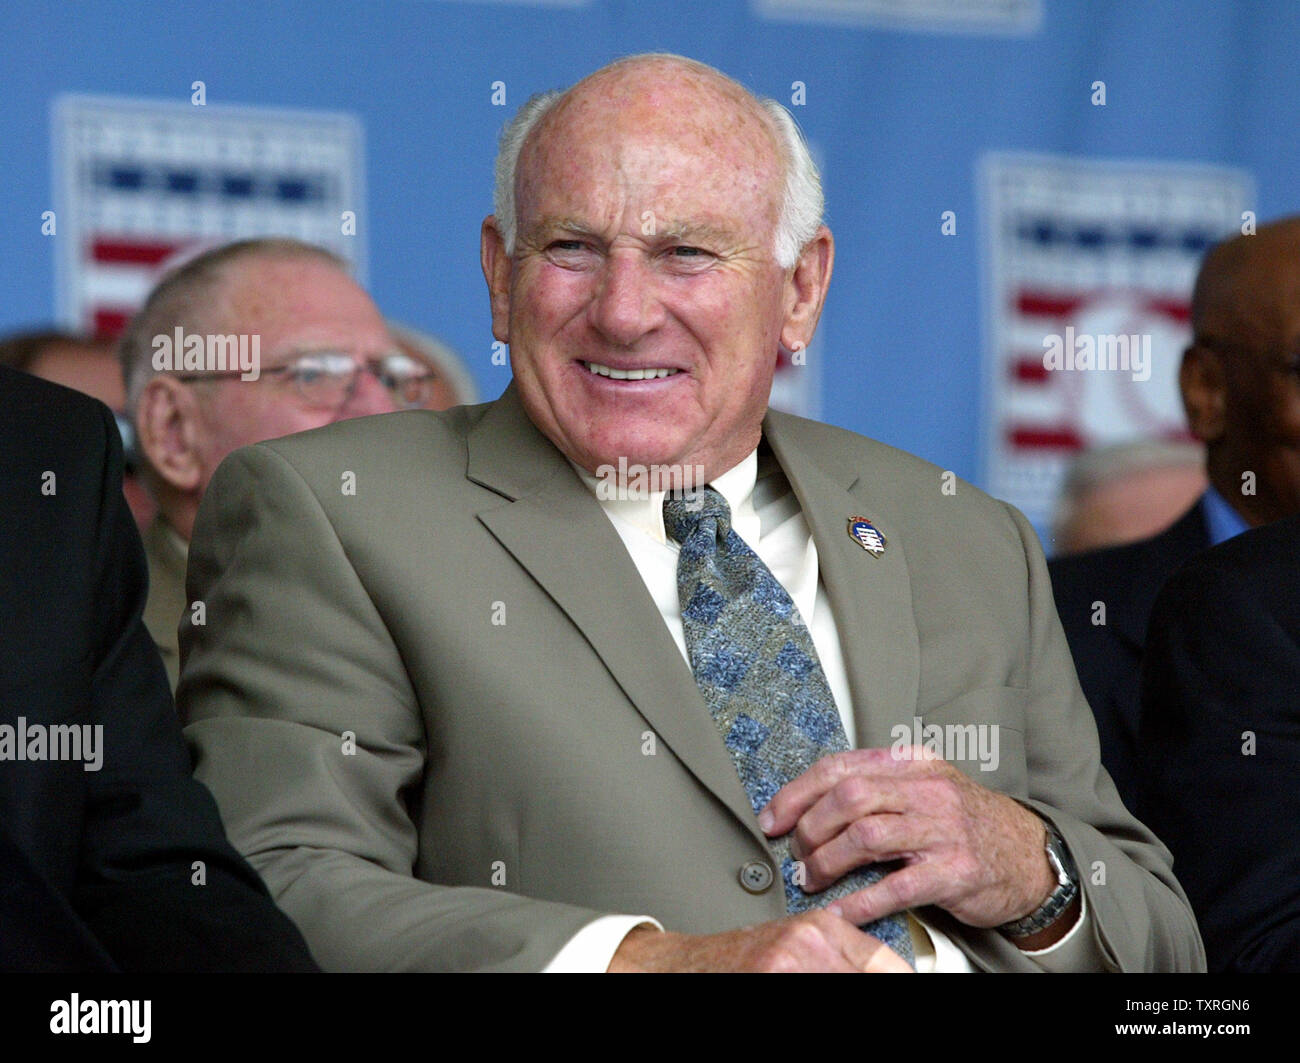 Baseball Hall of Fame member Harmon Killebrew enjoys the induction ceremonies for Paul Molitorr and Dennis Eckersley  in Cooperstown, NY on July 25, 2004.  (UPI Photo/Bill Greenblatt) Stock Photo